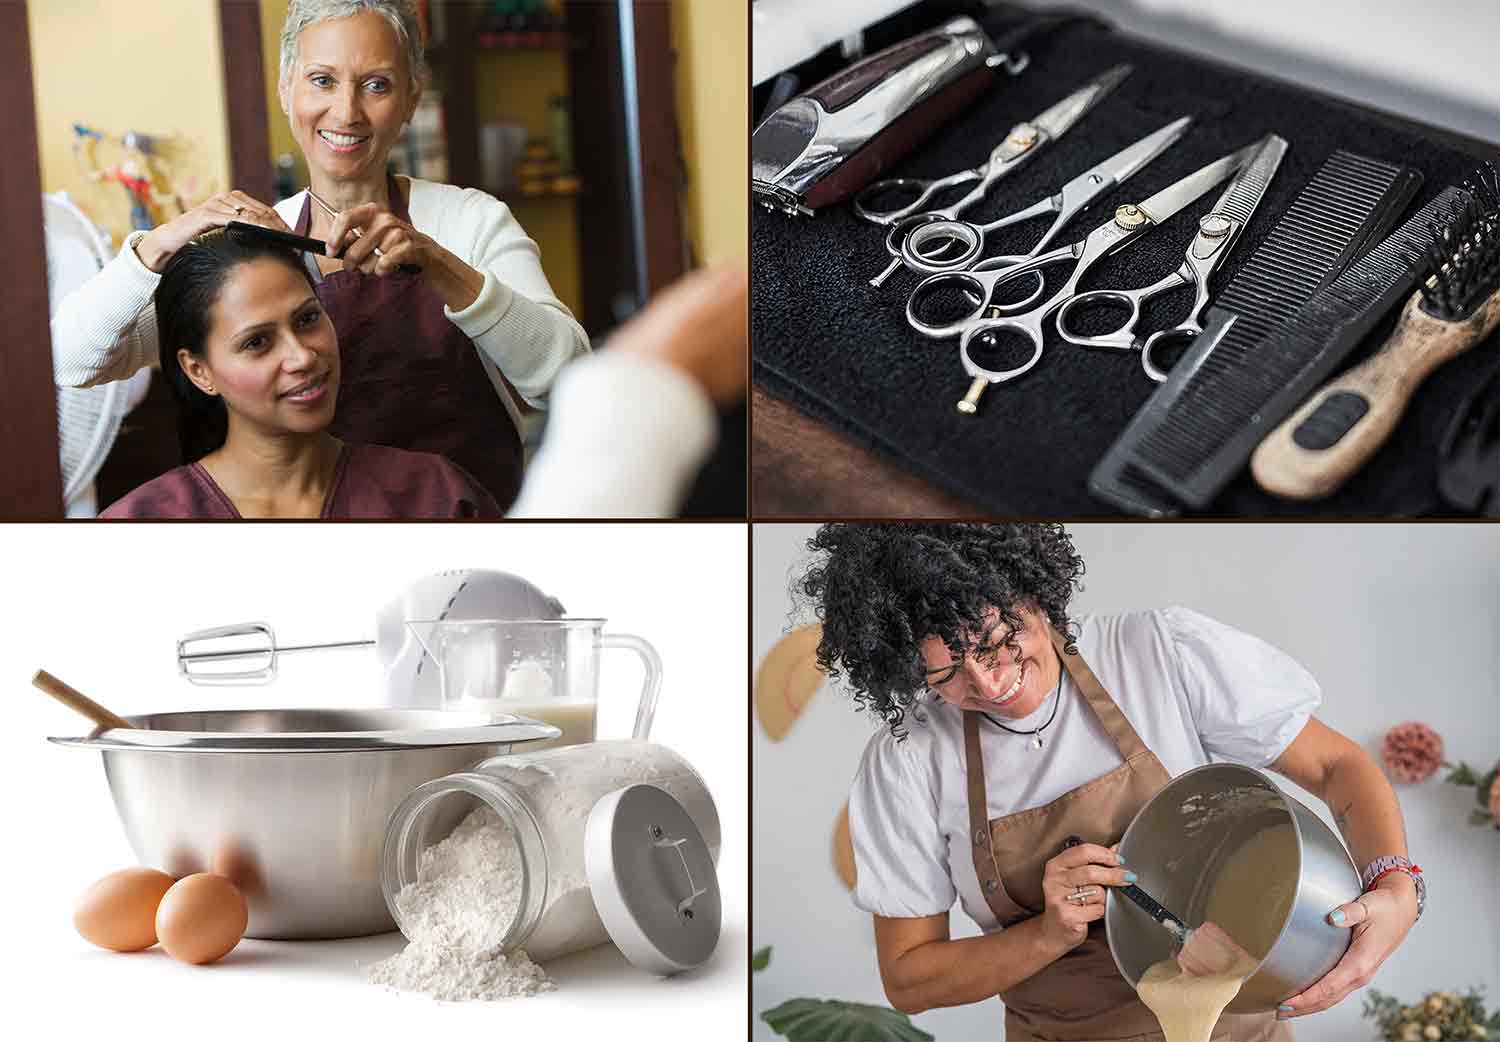 Grid of four photos showing a hairstylist with a client, hair styling tools, a baker pouring batter, and baking ingredients.